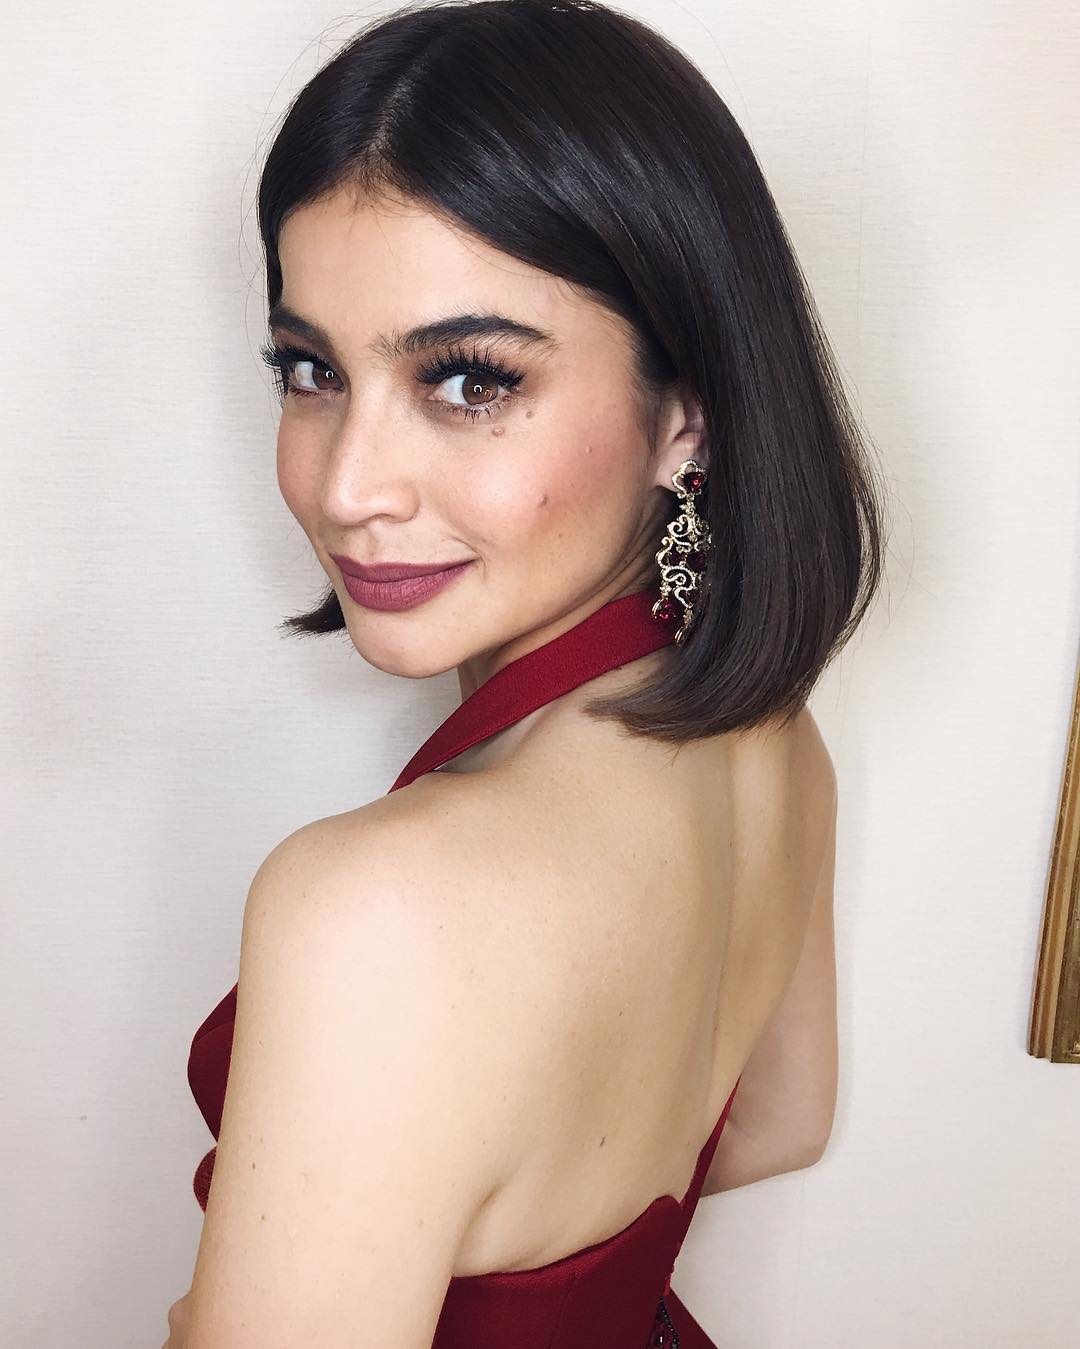 LOOK: We Compiled The Best OOTDs Of Anne Curtis In 1 Album